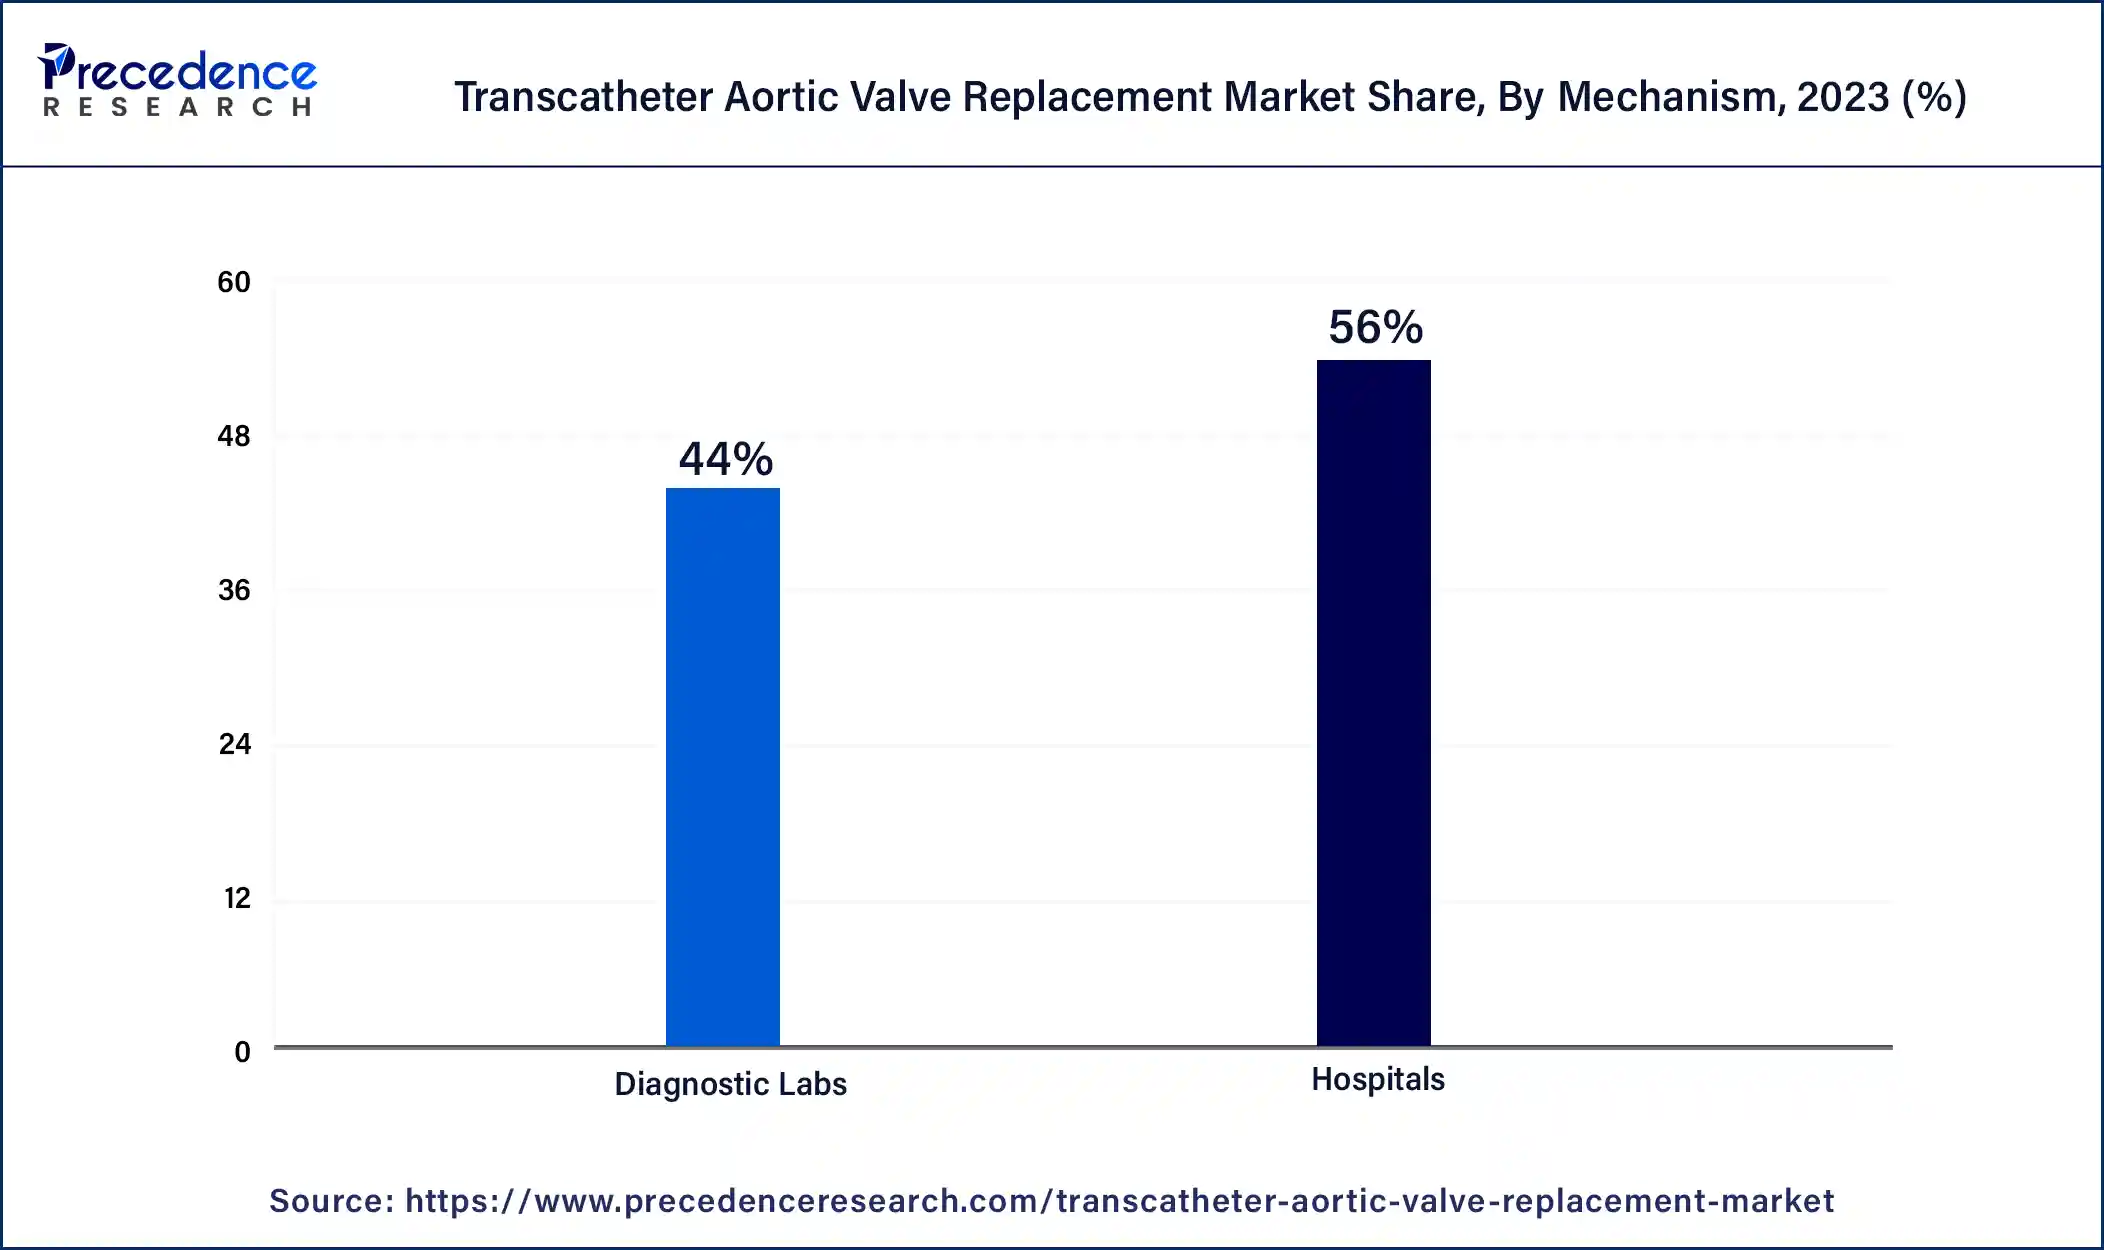 Transcatheter Aortic Valve Replacement Market Share, By Mechanism, 2023 (%)